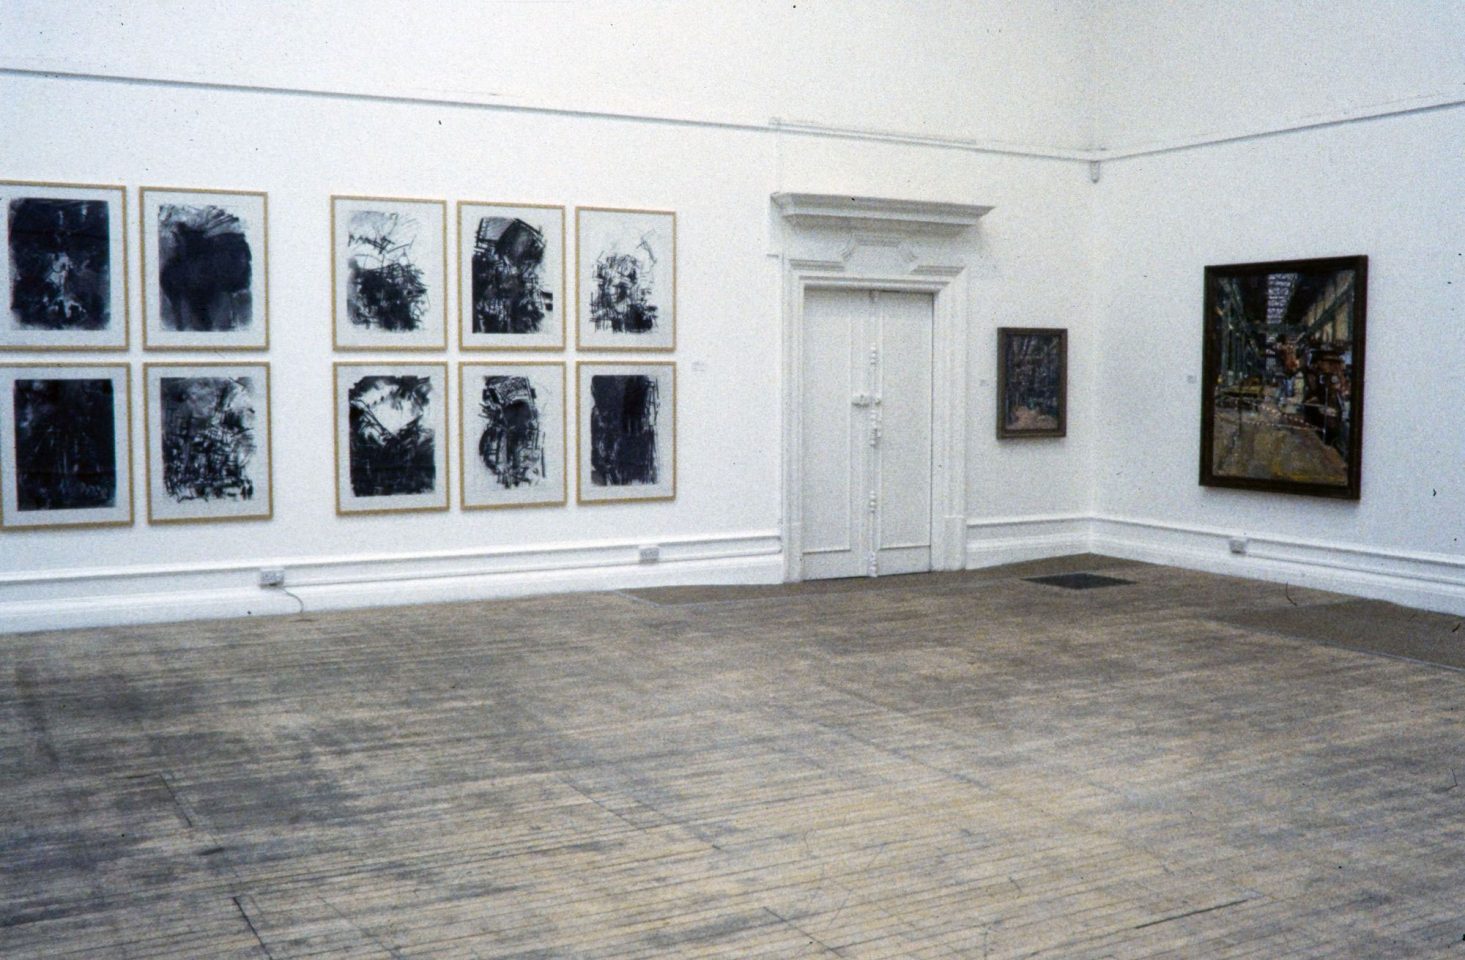 Installation view from Inside Bankside featuring work by Dennis Creffield, Anthony Eyton, Deanna Petherbridge, Terry Smith, Thomas Struth, Catherine Yass.
